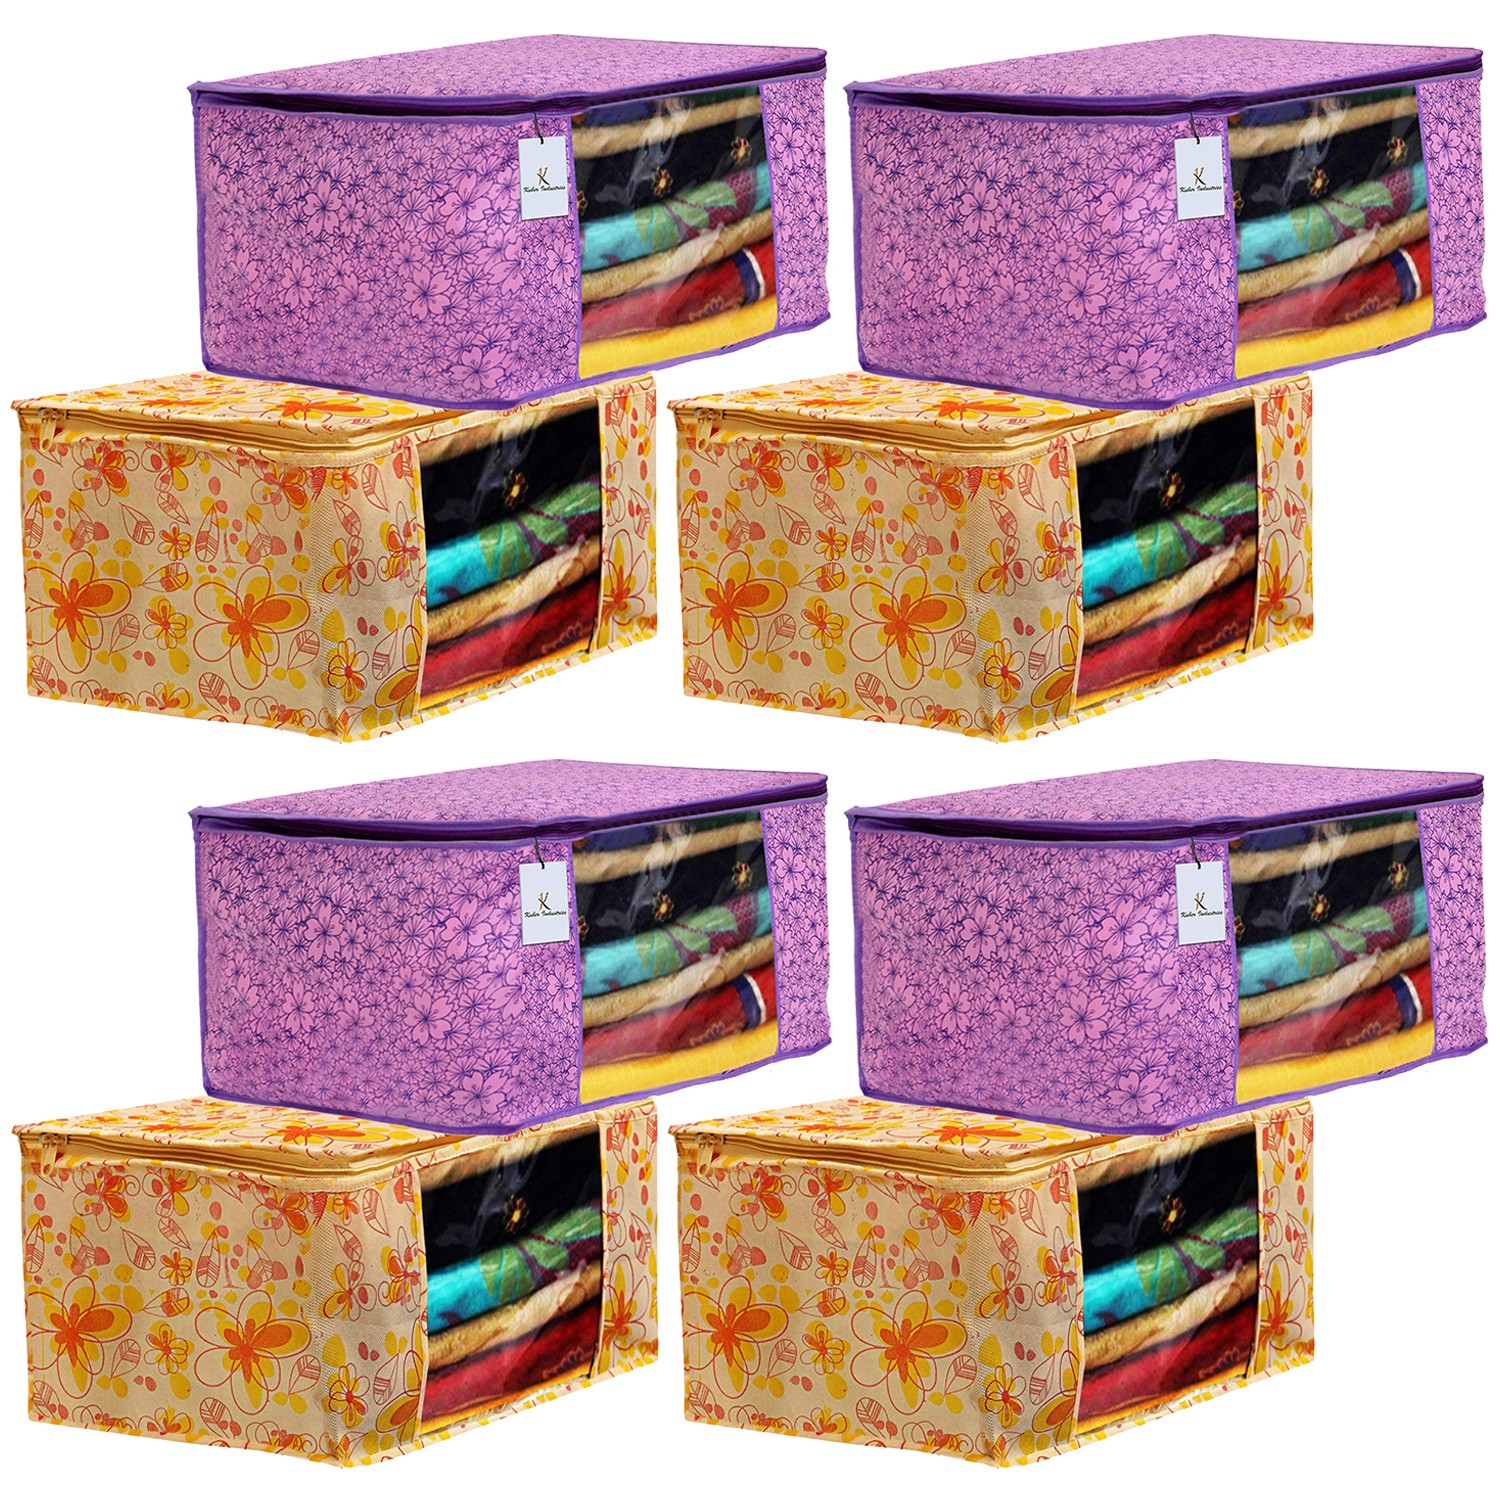 Kuber Industries Metalic Printed Non Woven Fabric Saree Cover Set with Transparent Window, Extra Large, Pink Purple & Ivory Red -CTKTC40777